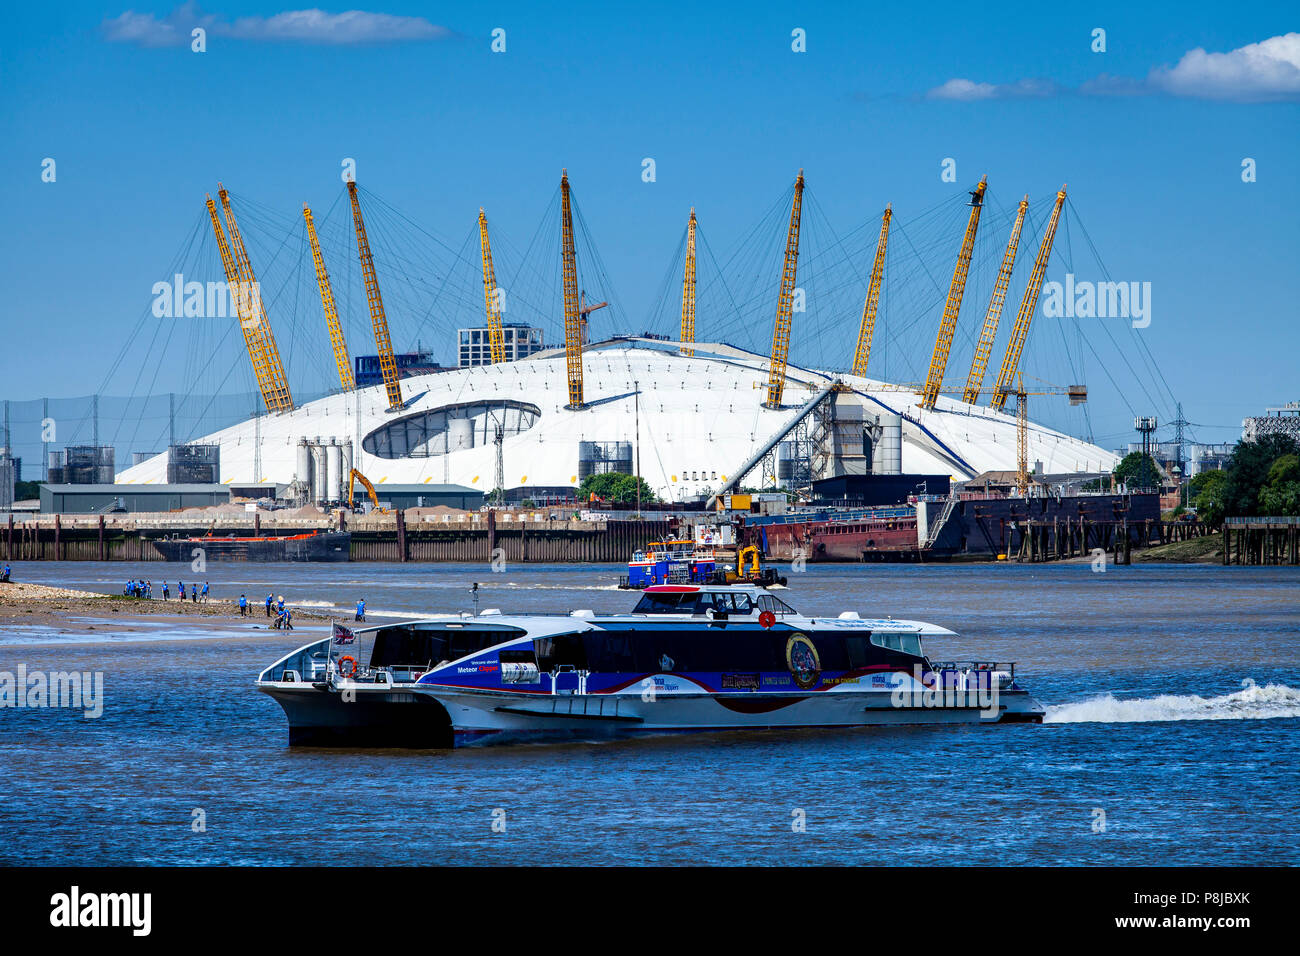 A Thames Clipper On The River Thames With The O2 Arena In The Backround, London, England Stock Photo